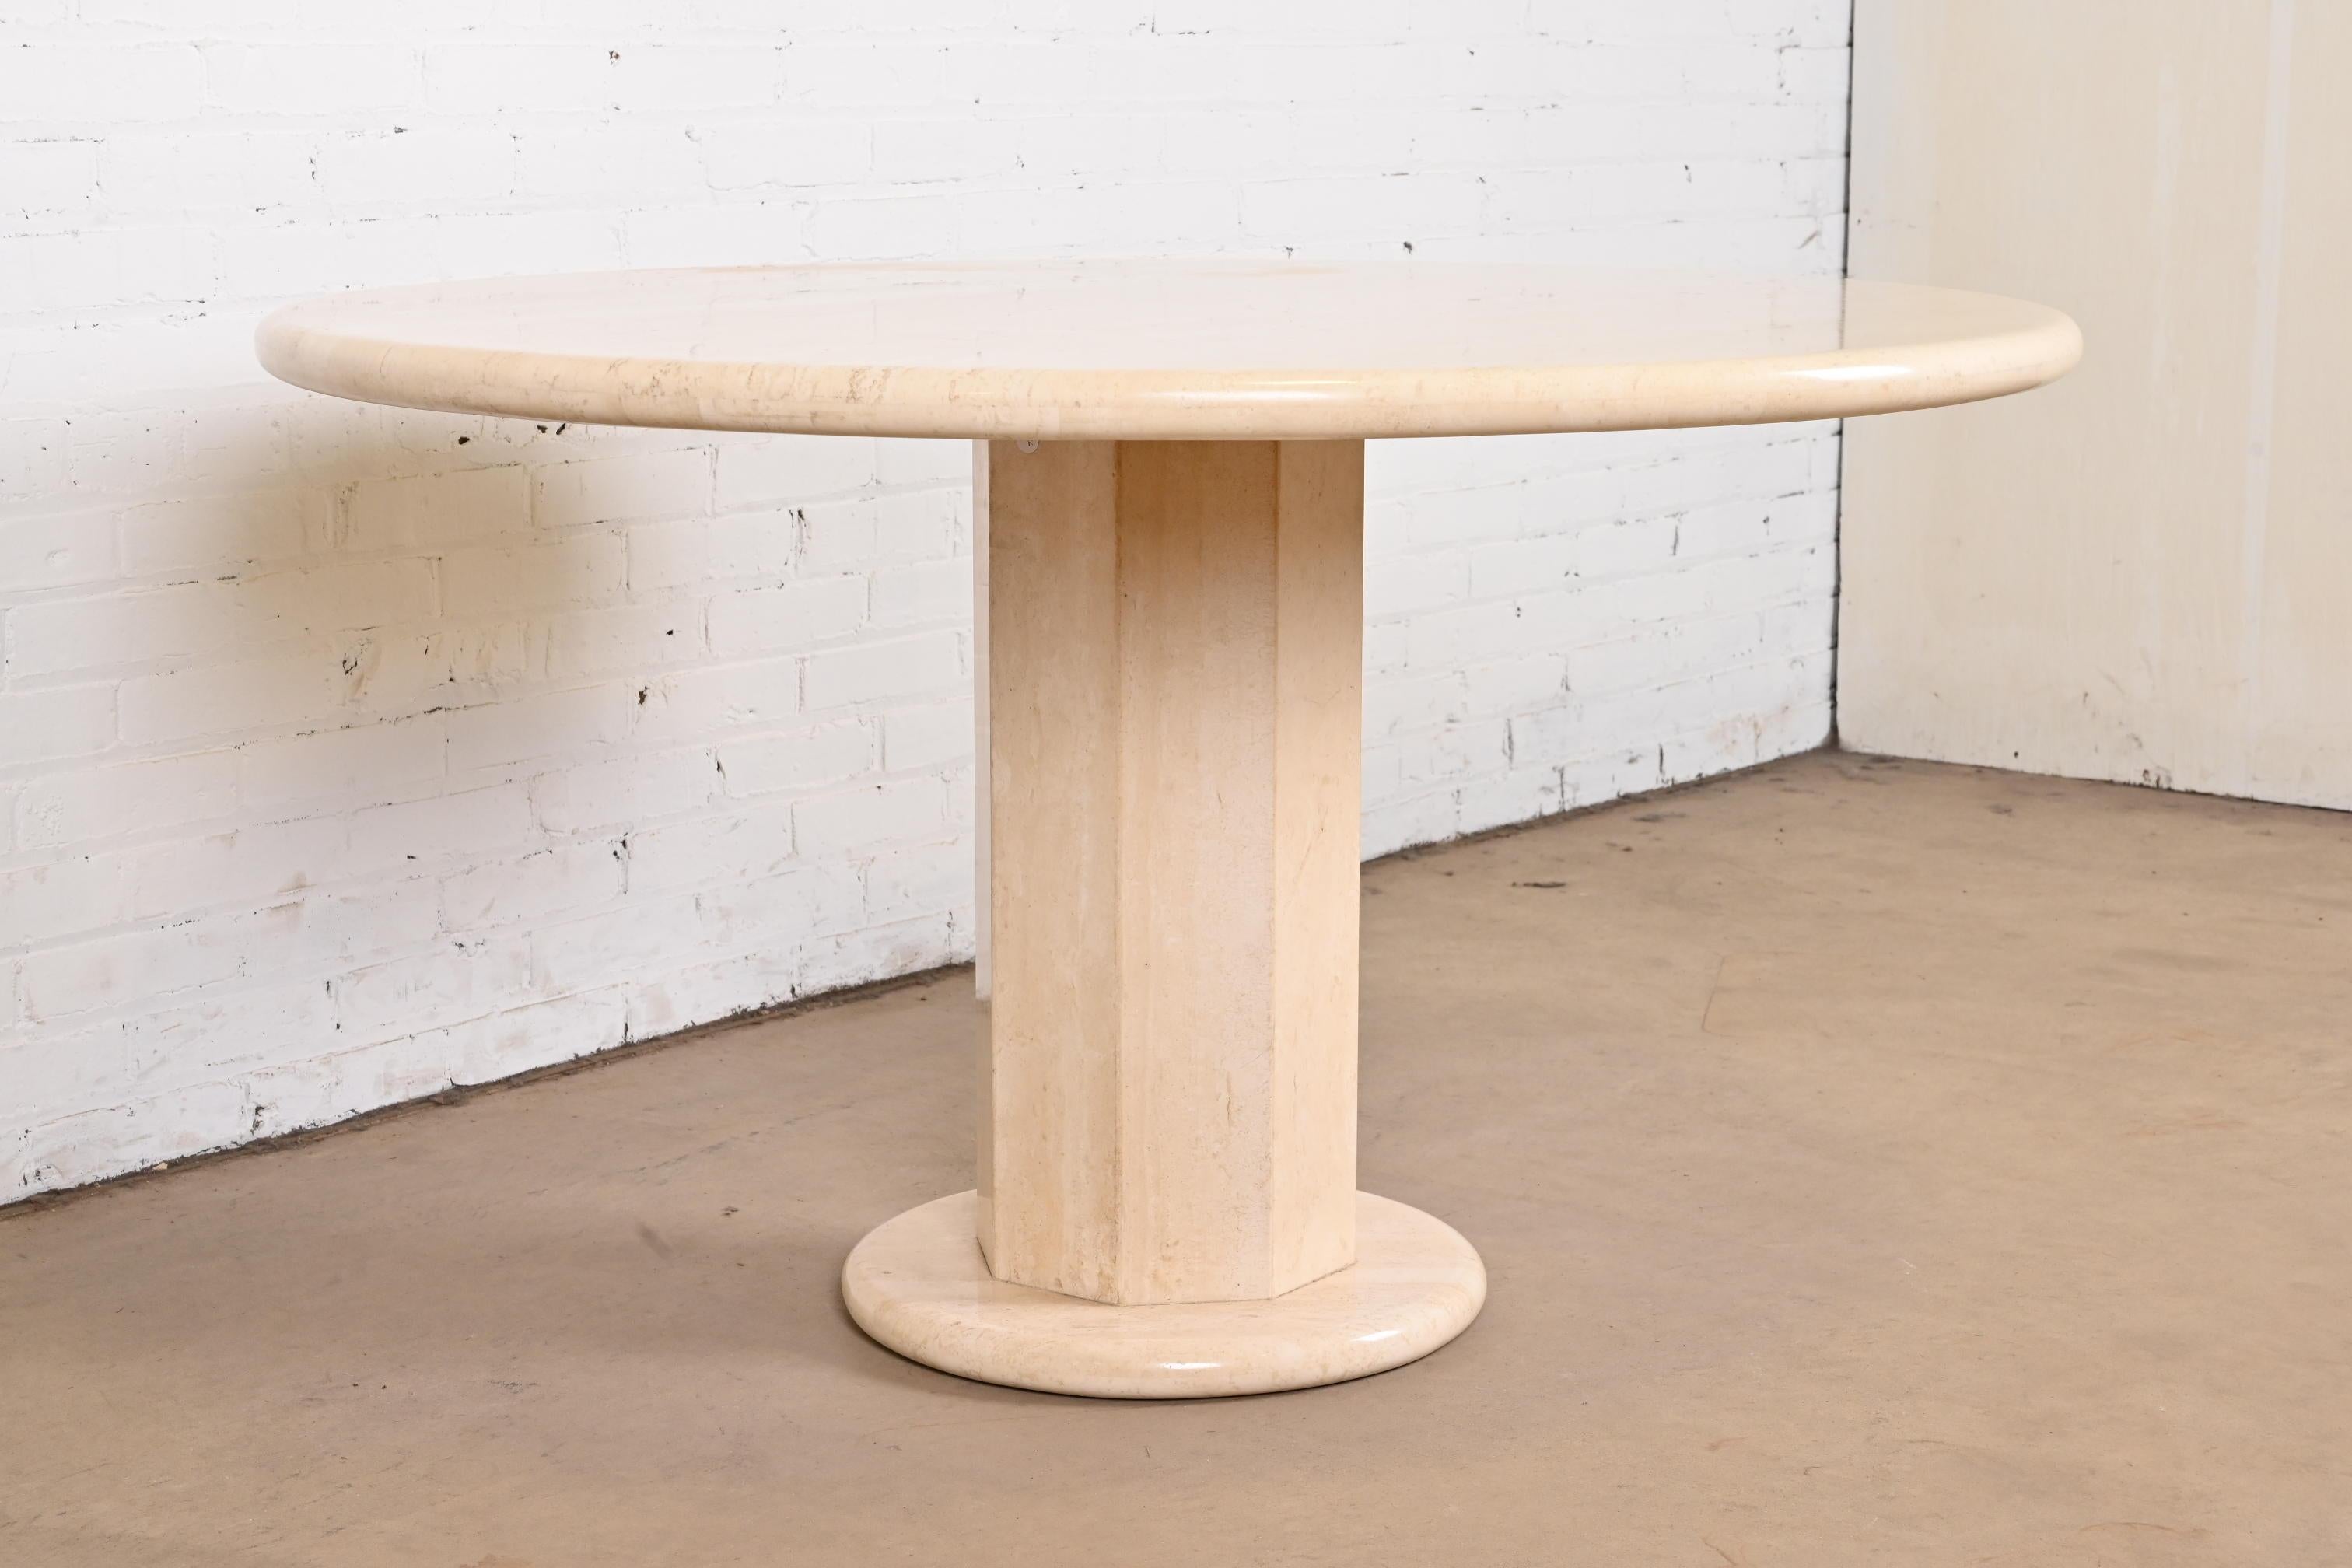 Modern Italian Travertine Round Pedestal Dining or Center Table by Ello, 1970s For Sale 2